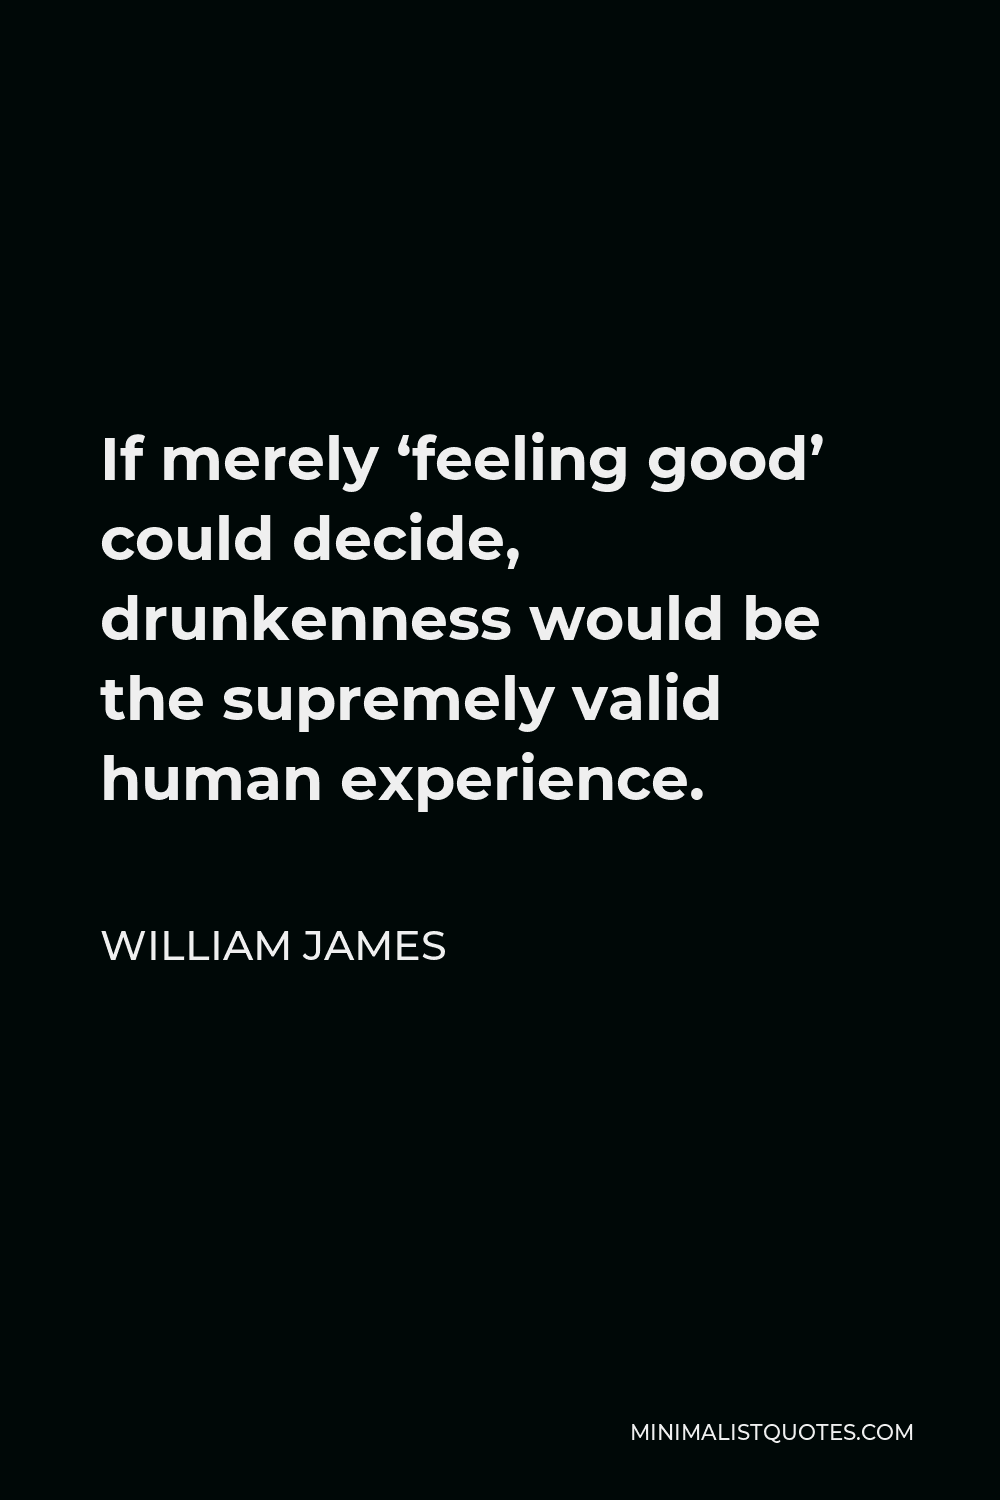 William James Quote - If merely ‘feeling good’ could decide, drunkenness would be the supremely valid human experience.